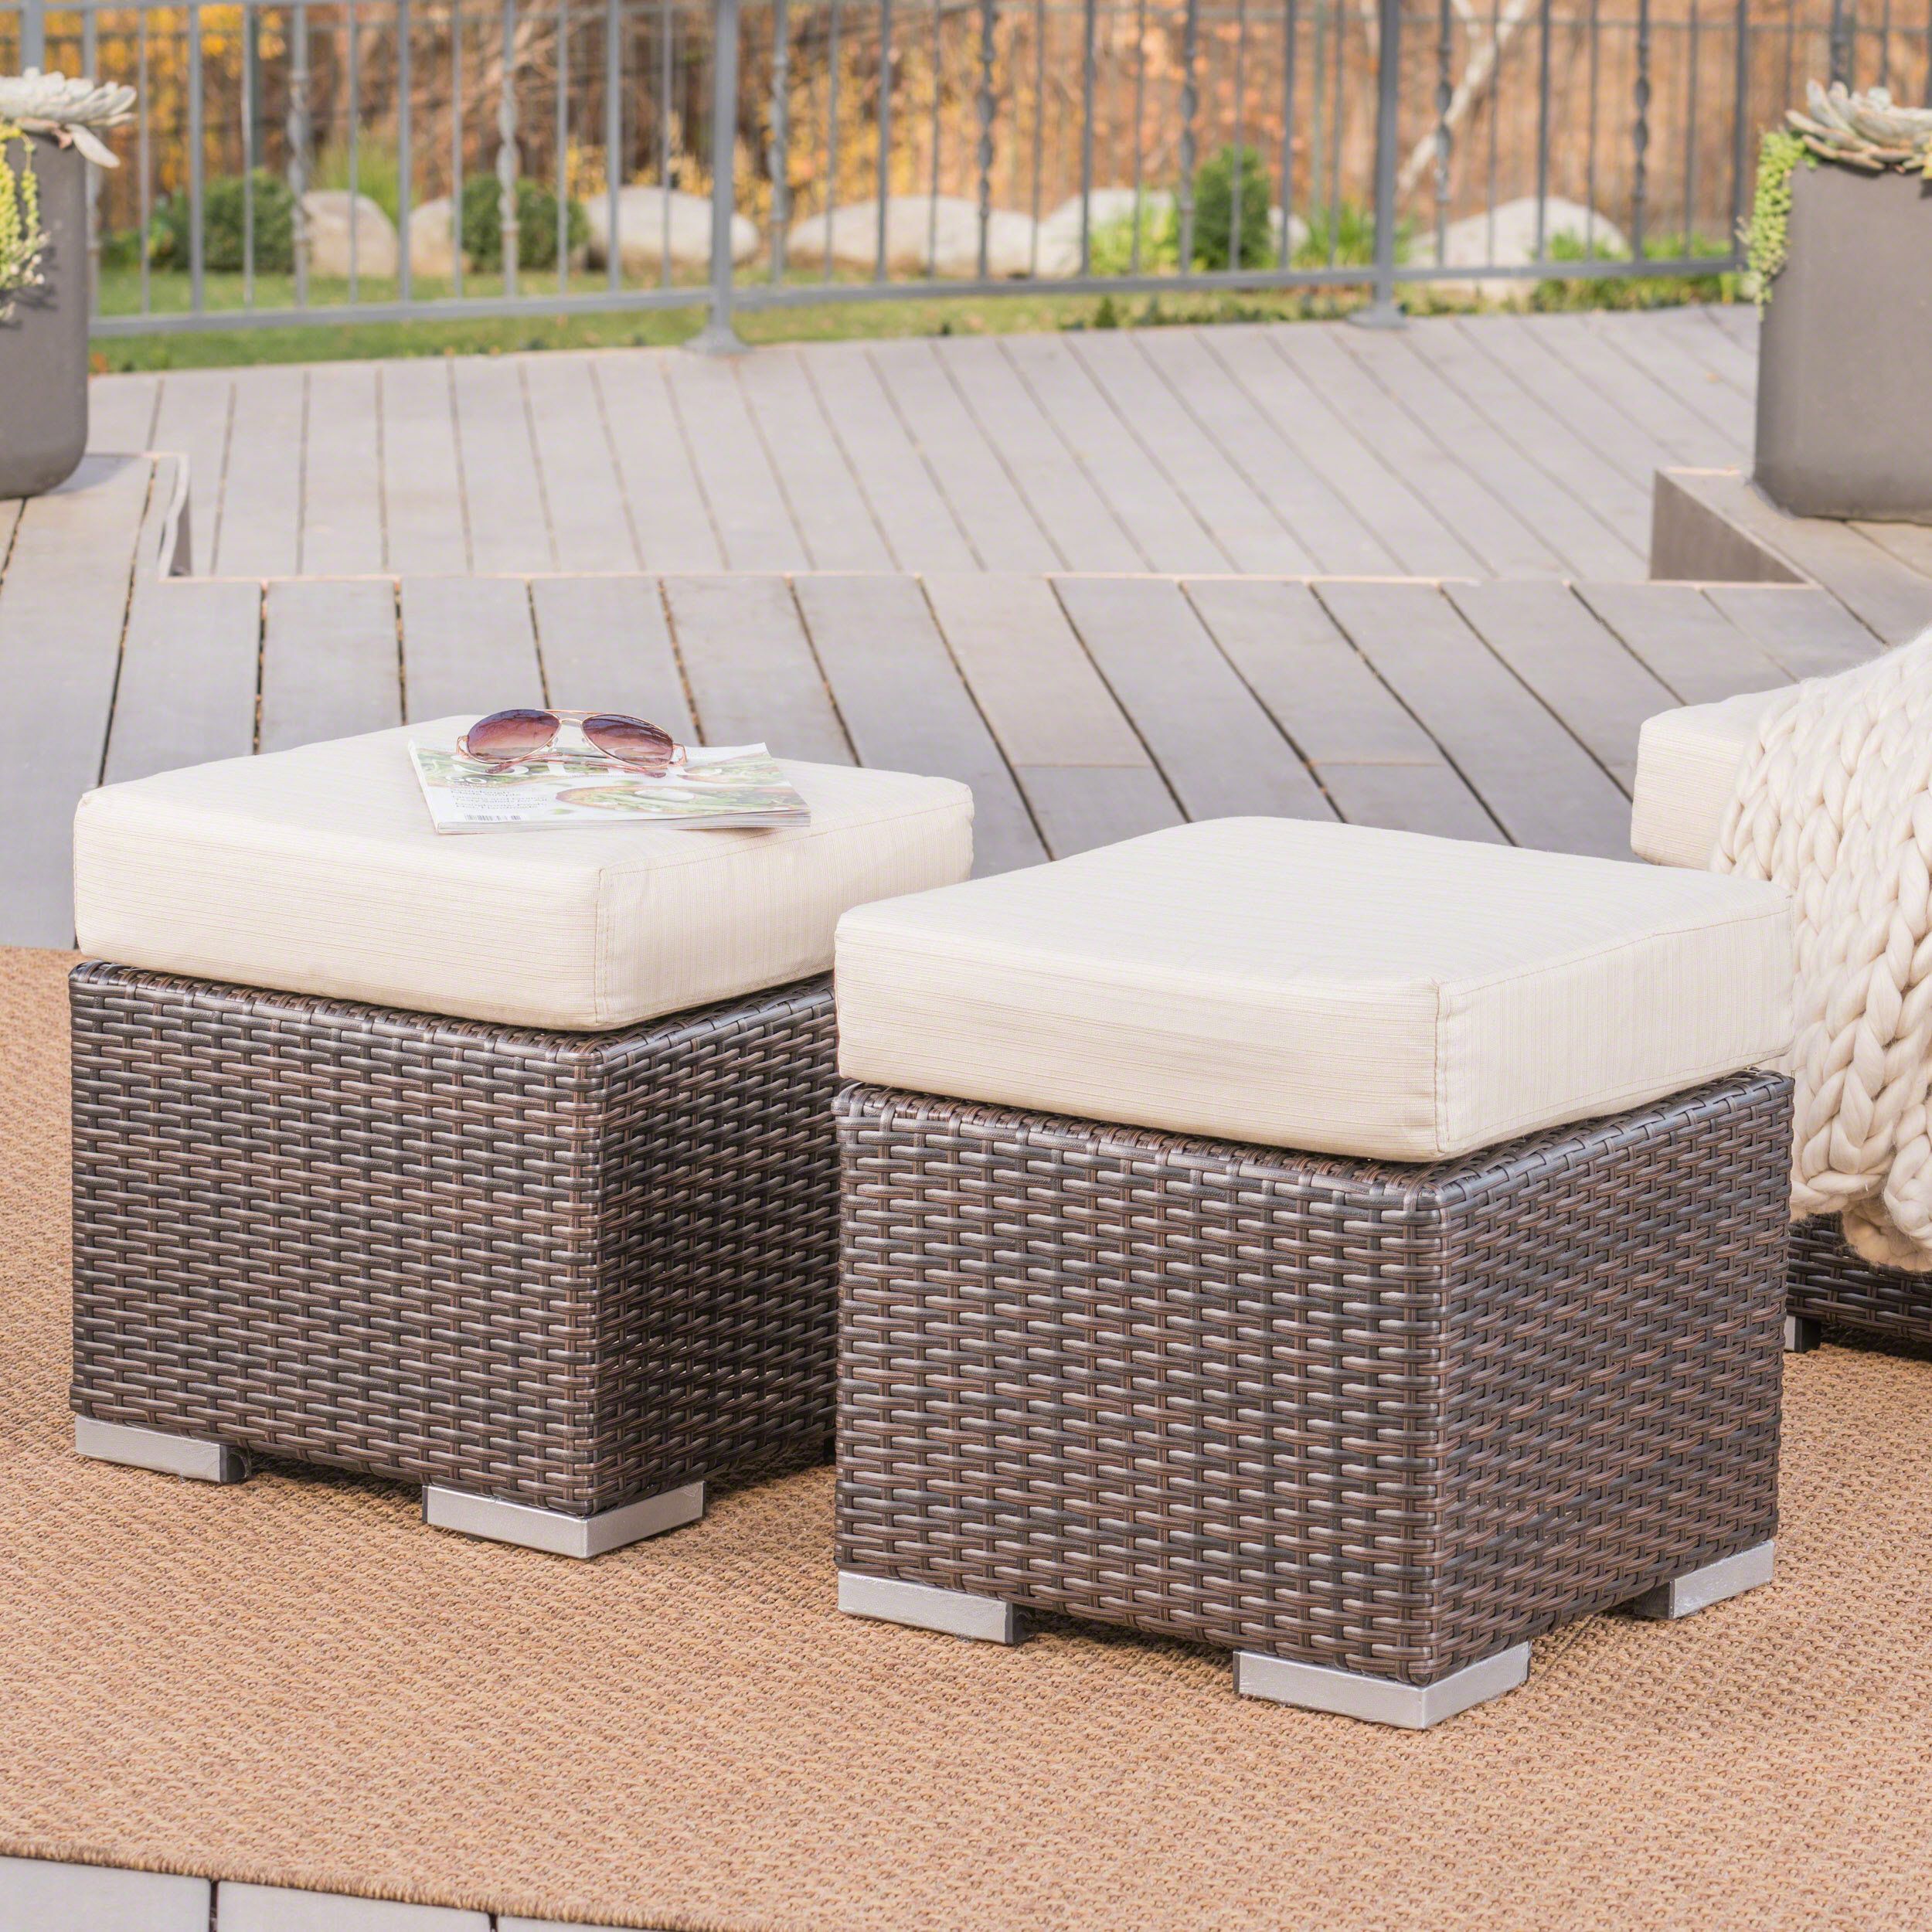 Avianna Outdoor 16 Inch Wicker Ottoman Seat With Cushion, Set Of 2,  Multibrown, Beige – Walmart Inside 16 Inch Ottomans (View 8 of 15)